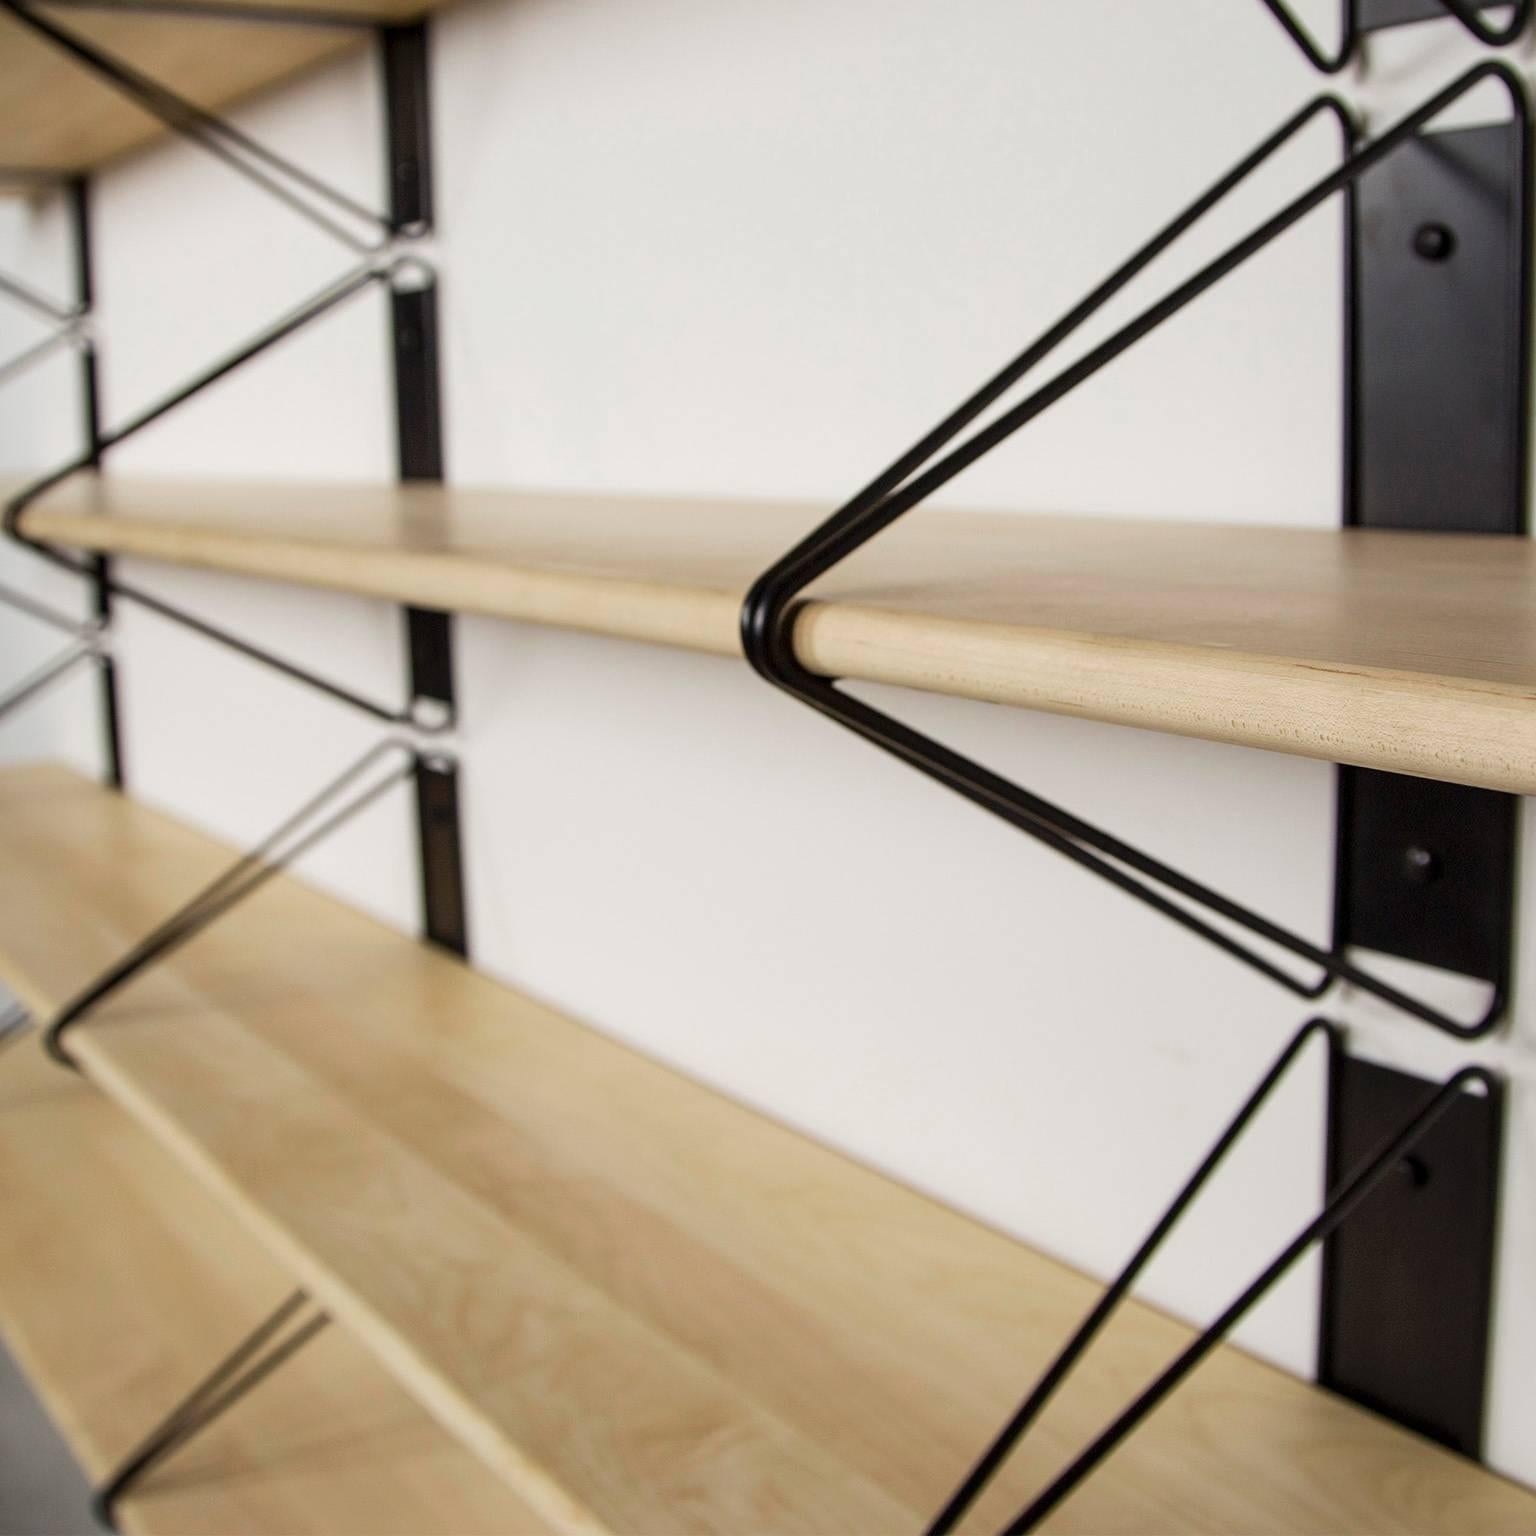 Contemporary Set of 5 Strut Shelves from Souda, Black and Maple, Made to Order For Sale